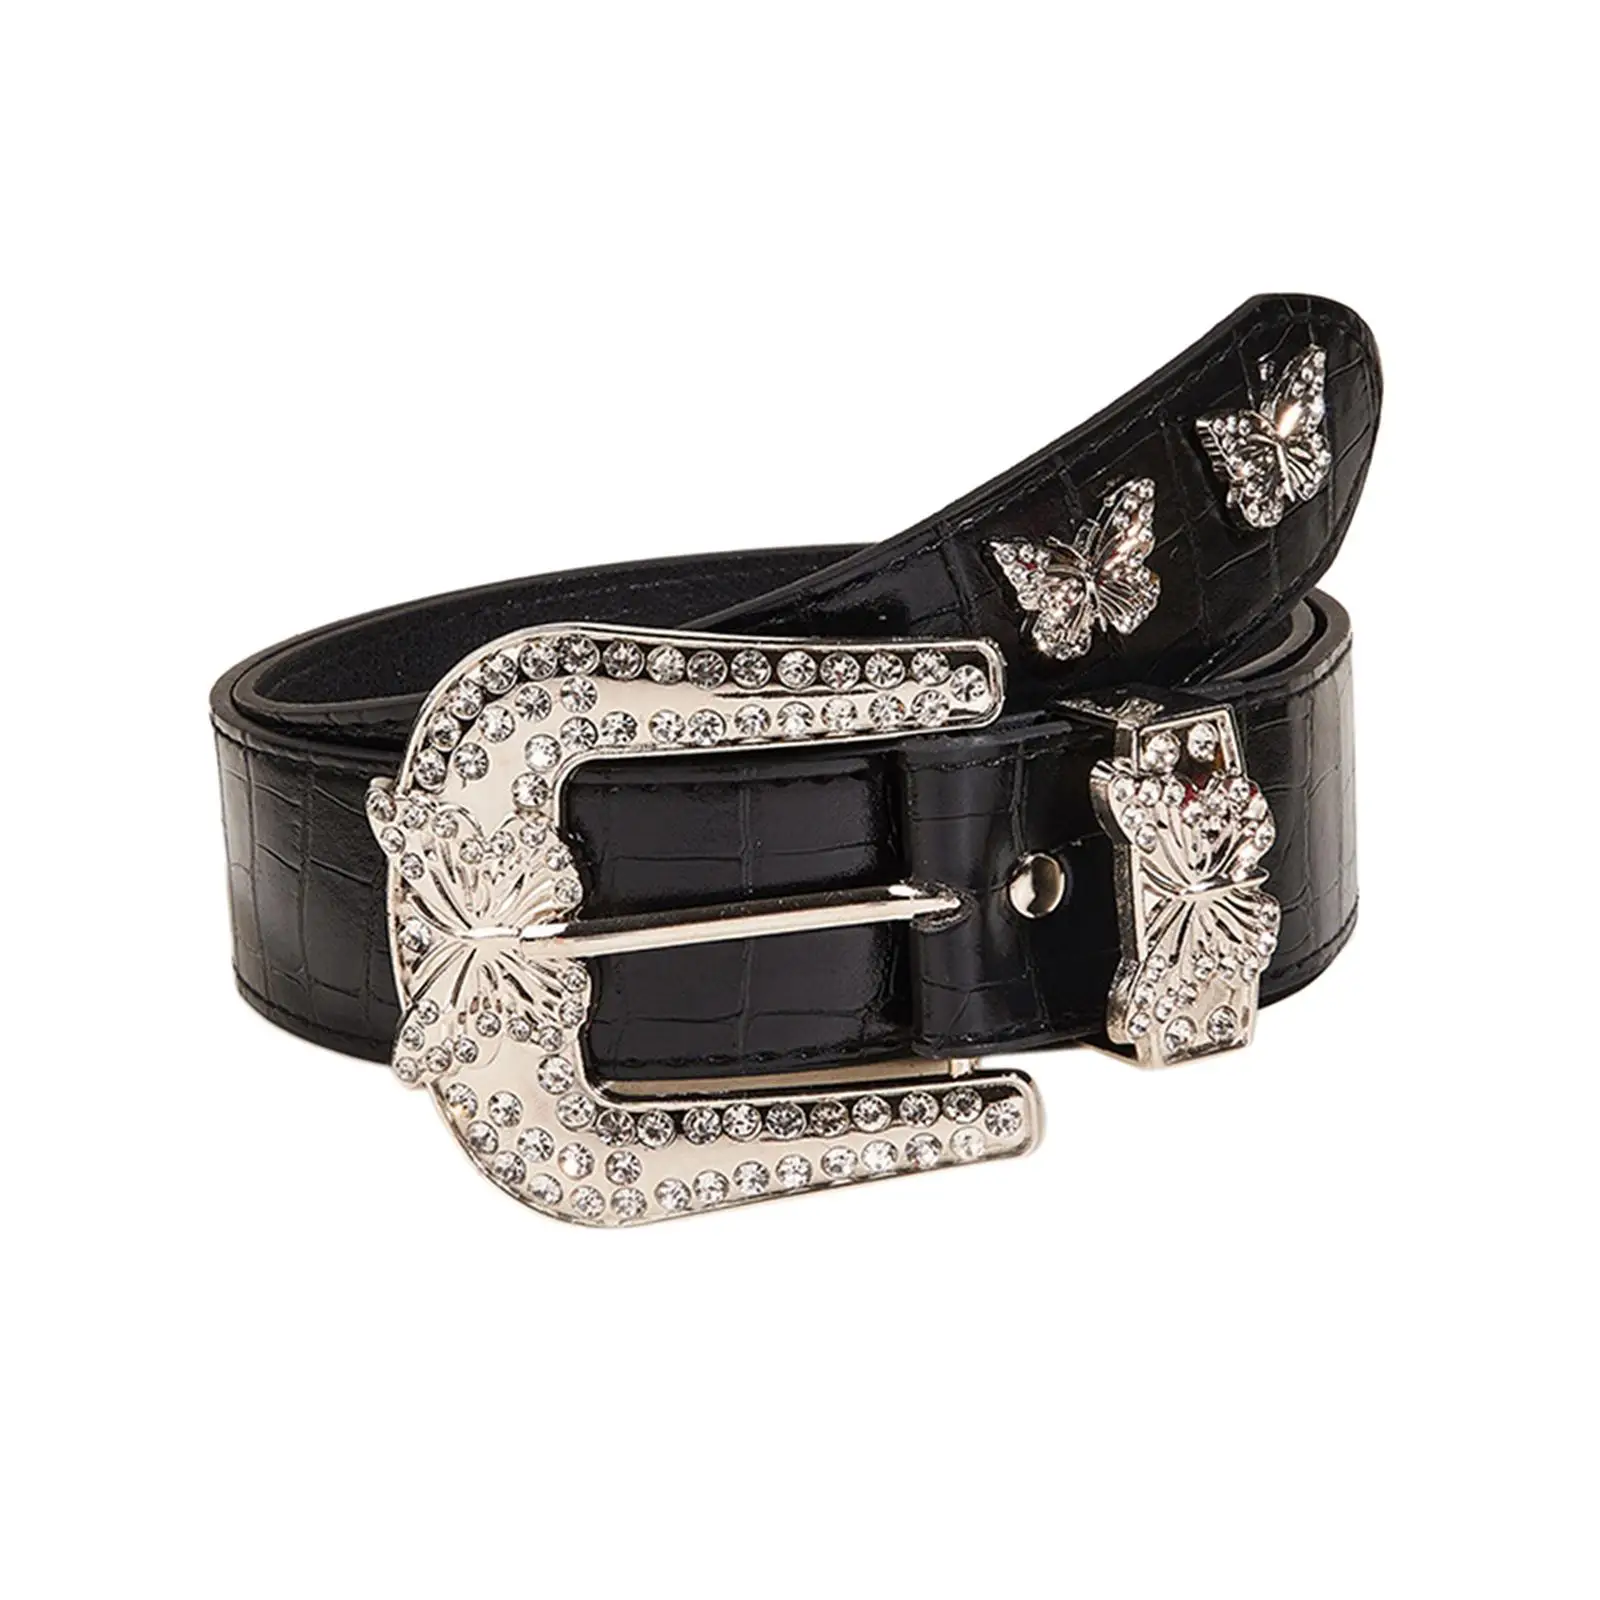 

Women Leather Belt Metal Prong Buckle Gothic Punk Belt Rhinestone Butterfly Decoration 1.5inch Width Trousers Accessories